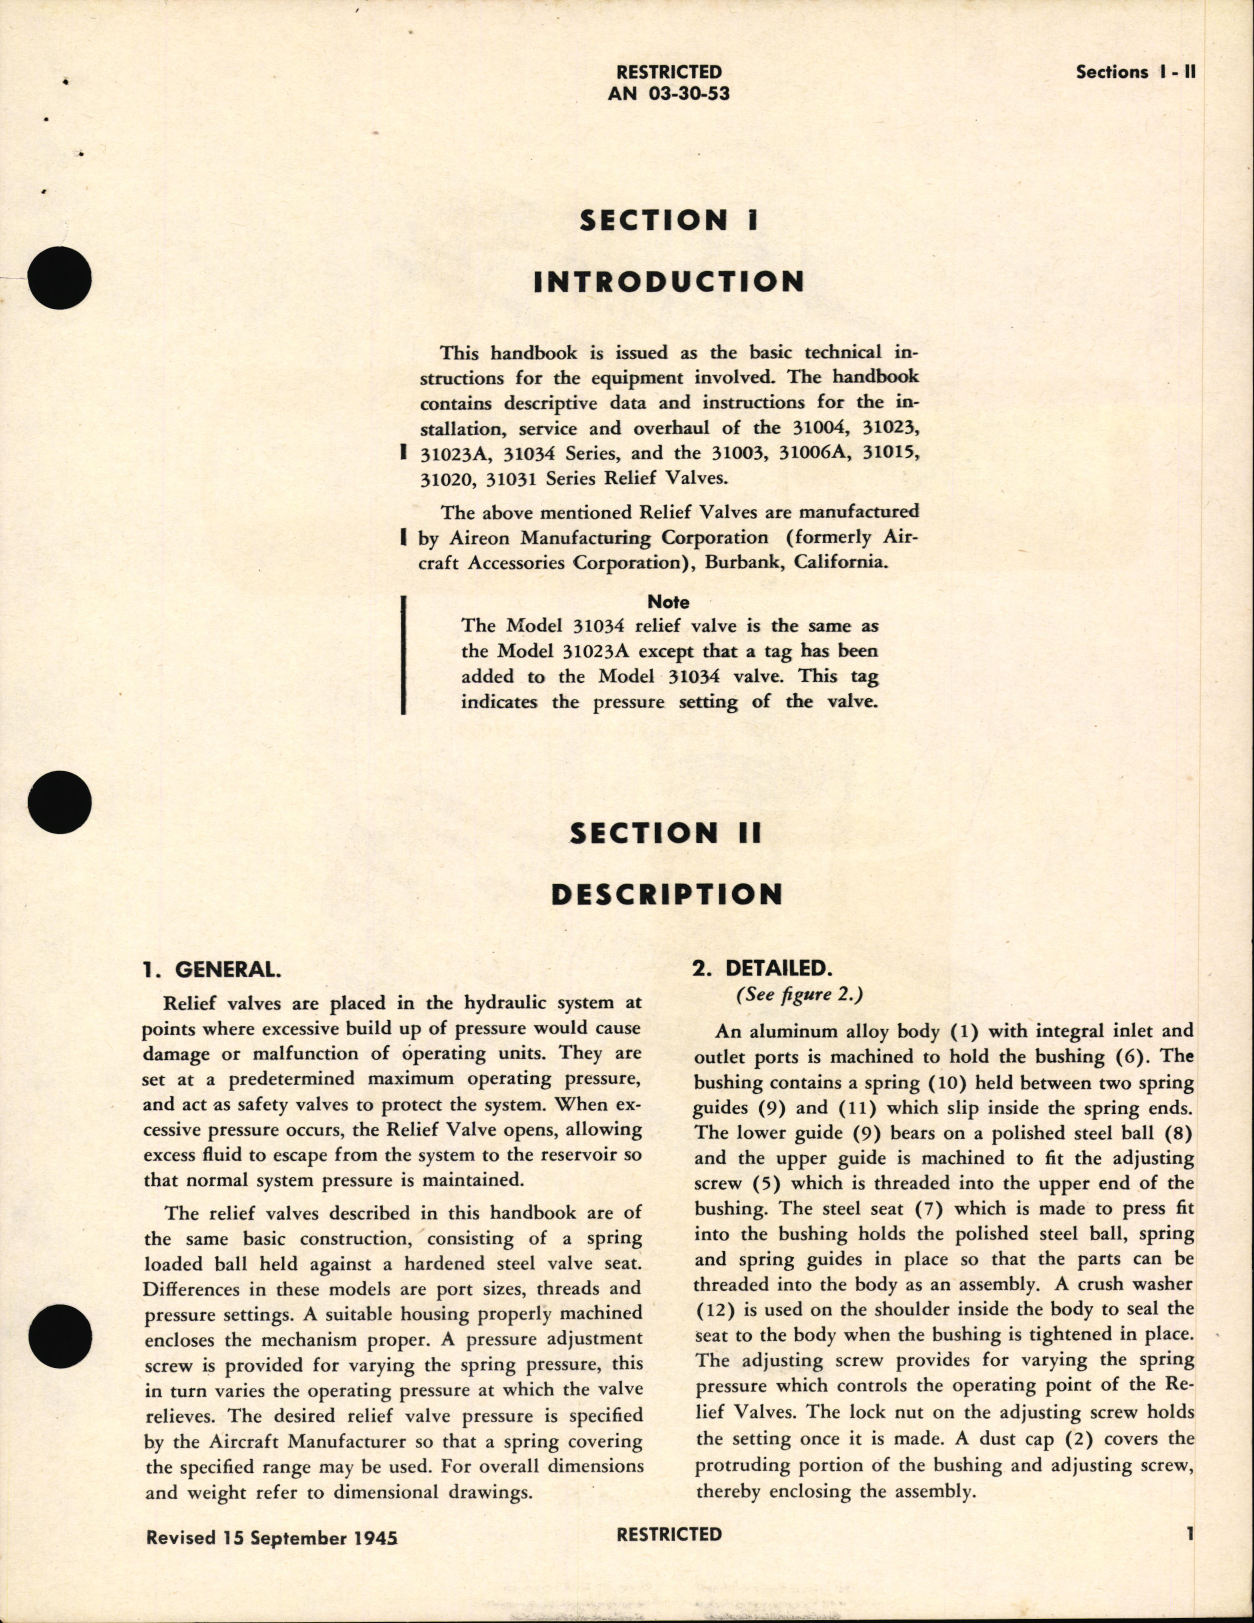 Sample page 7 from AirCorps Library document: Operation, Service and Overhaul Instructions with Parts and Catalog for Relief Valves